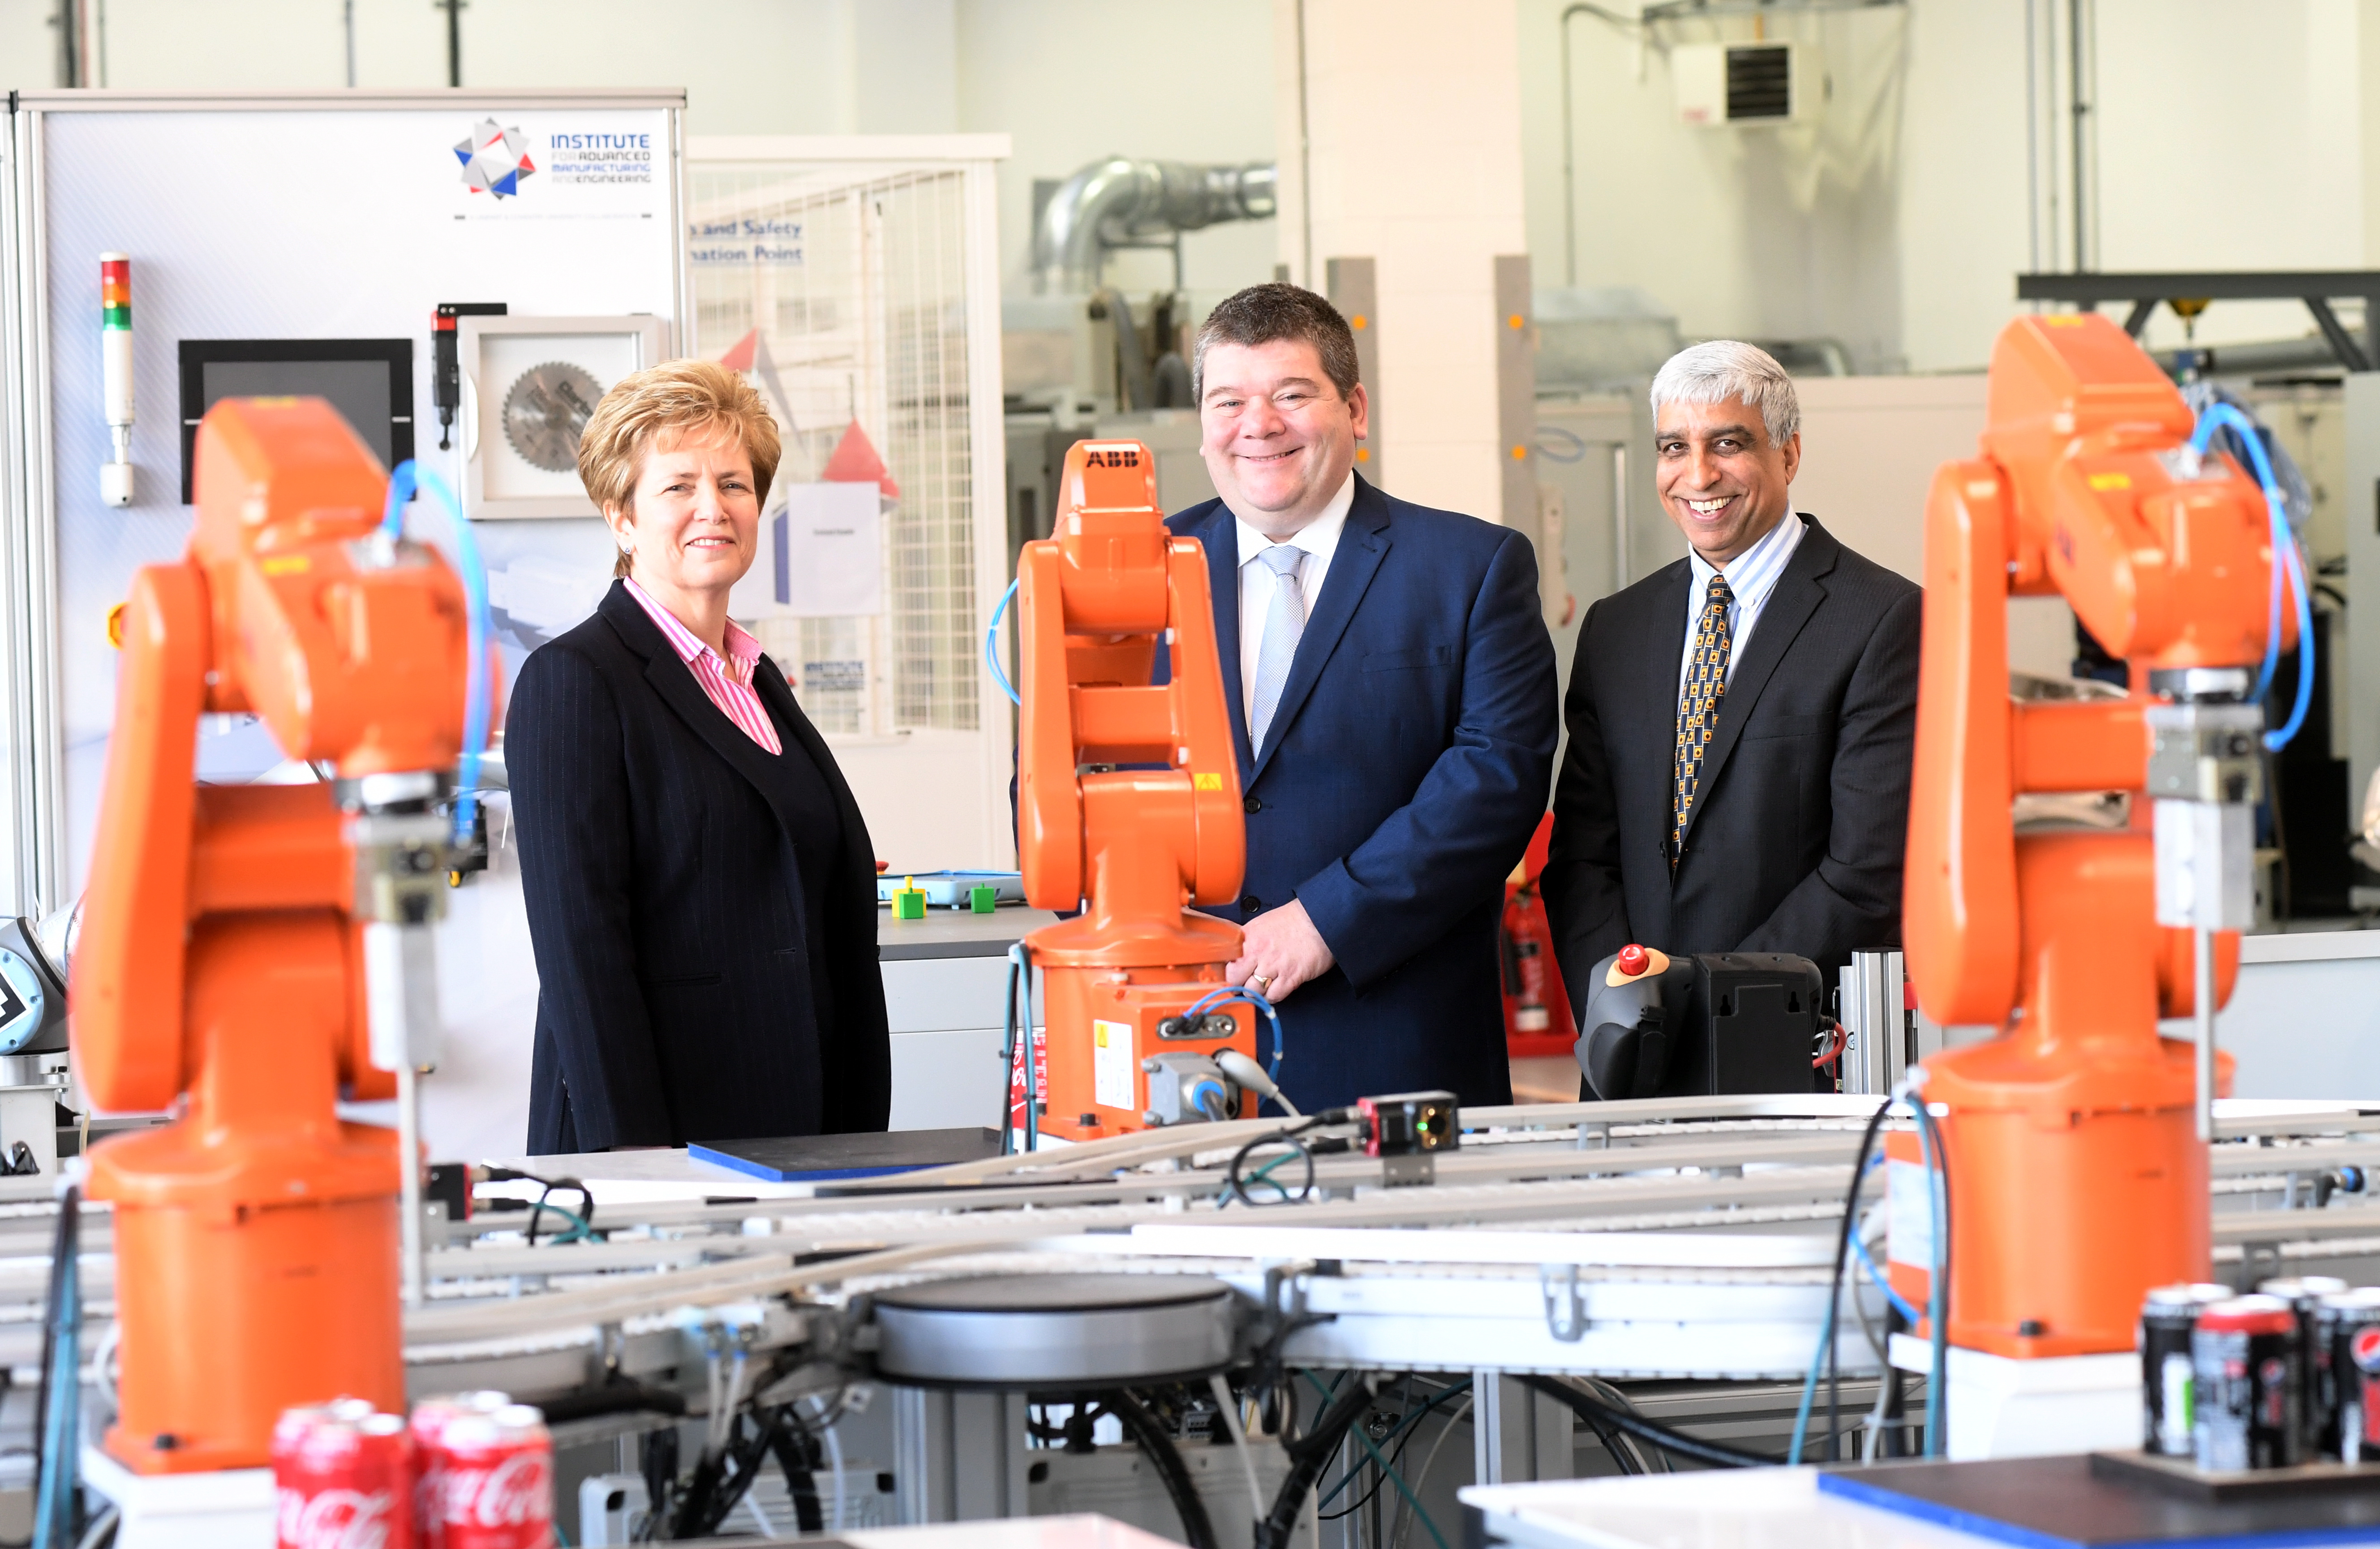 £5m project to train engineers of the future